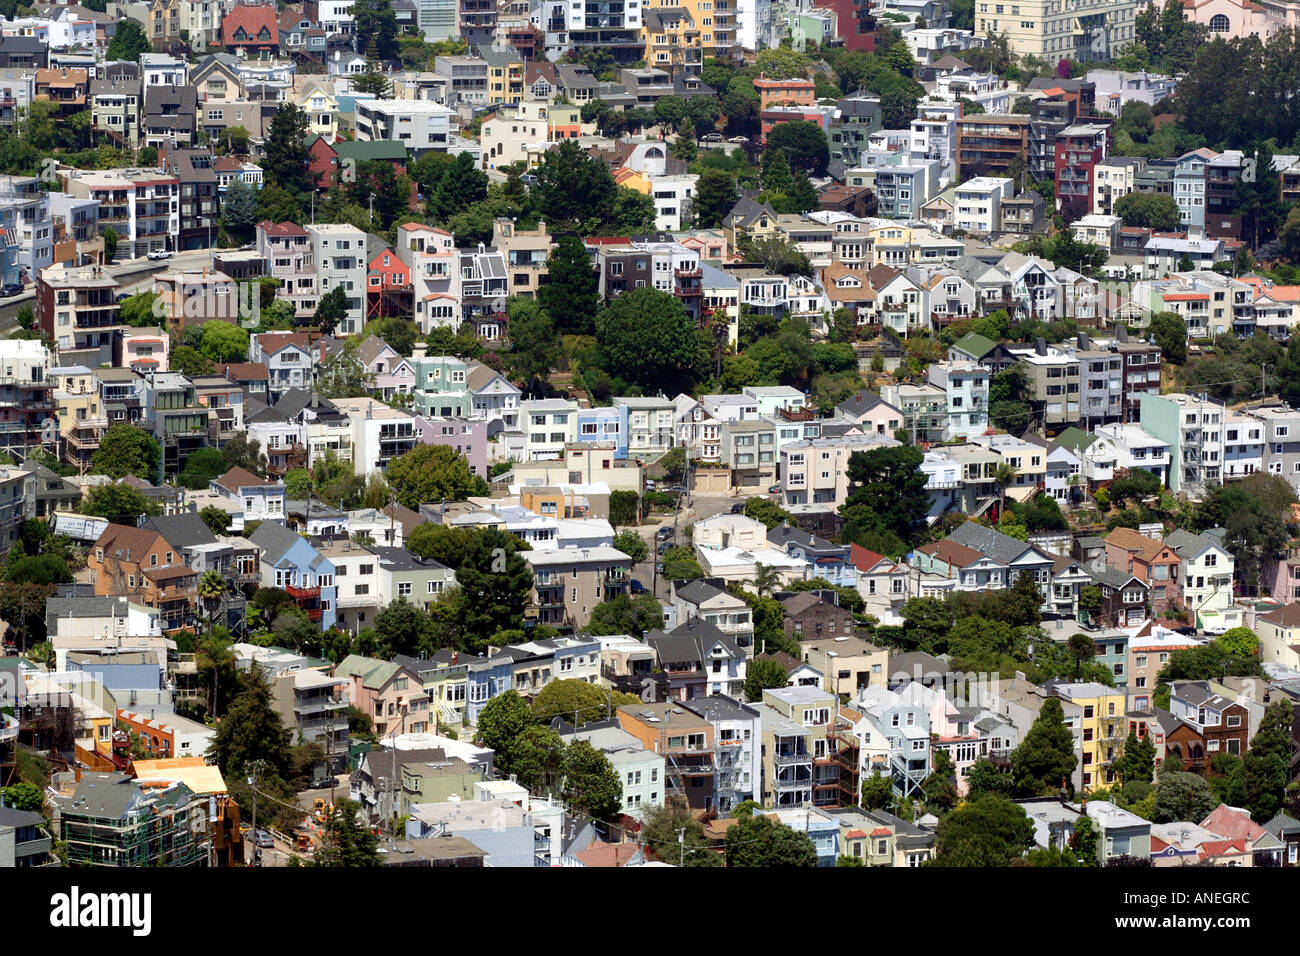 Aerial View of San Francisco Residential Architecture Stock Photo